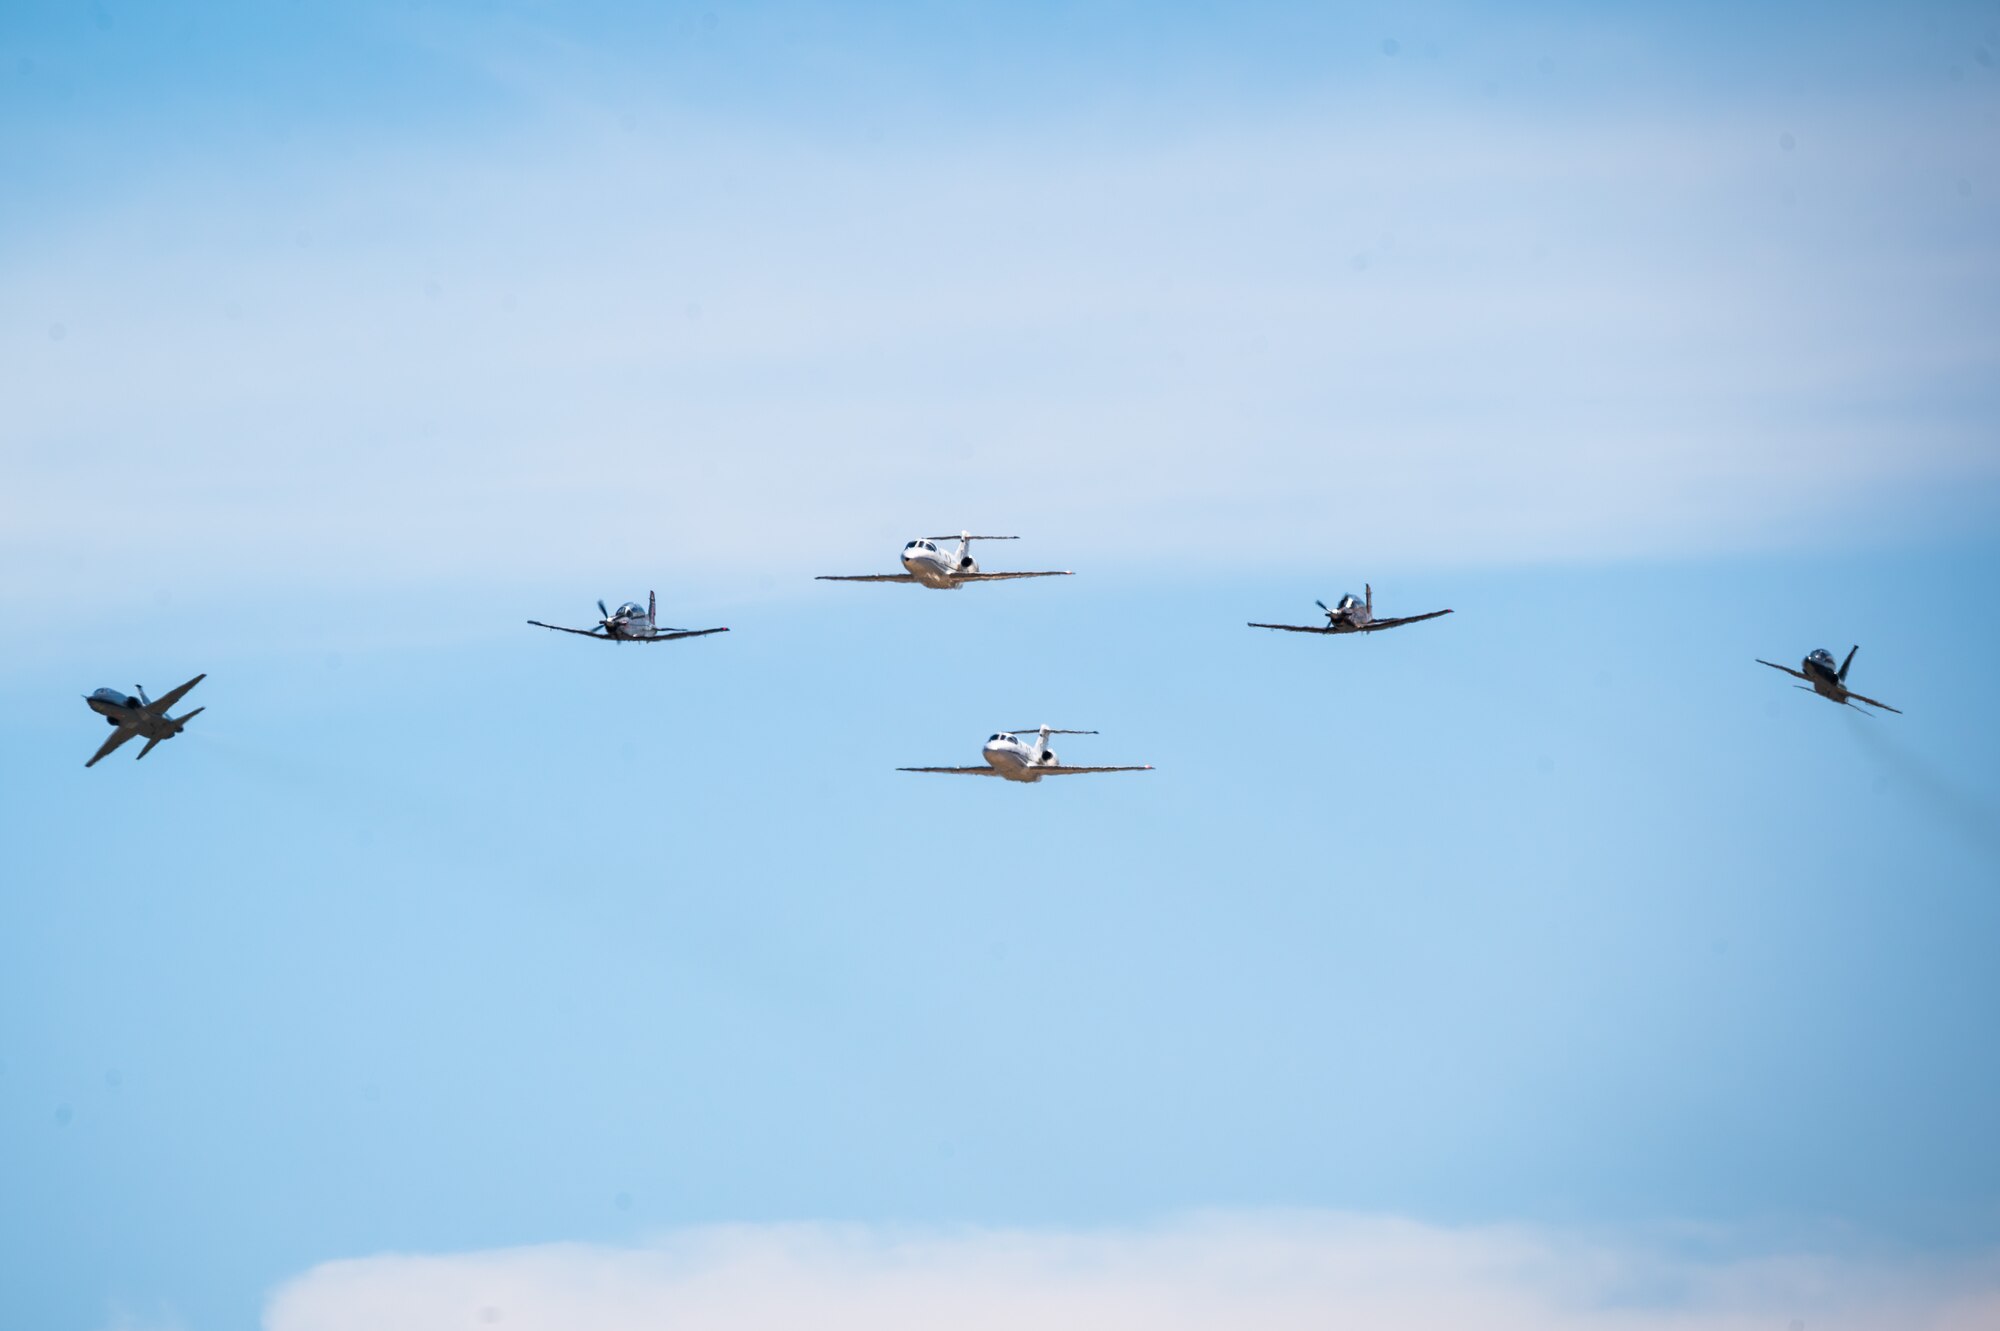 Six U.S. Air Force aircraft perform a dissimilar formation during the Fiesta of Flight airshow at Laughlin Air Force Base, Texas, March 9, 2024. The formation included two T-1A Jayhawks, two T-6A Texan II’s and two T-38C Talons. Approximately 16,000 people attended the Fiesta of Flight 2024. (U.S. Air Force photo by Airman 1st Class Keira Rossman)